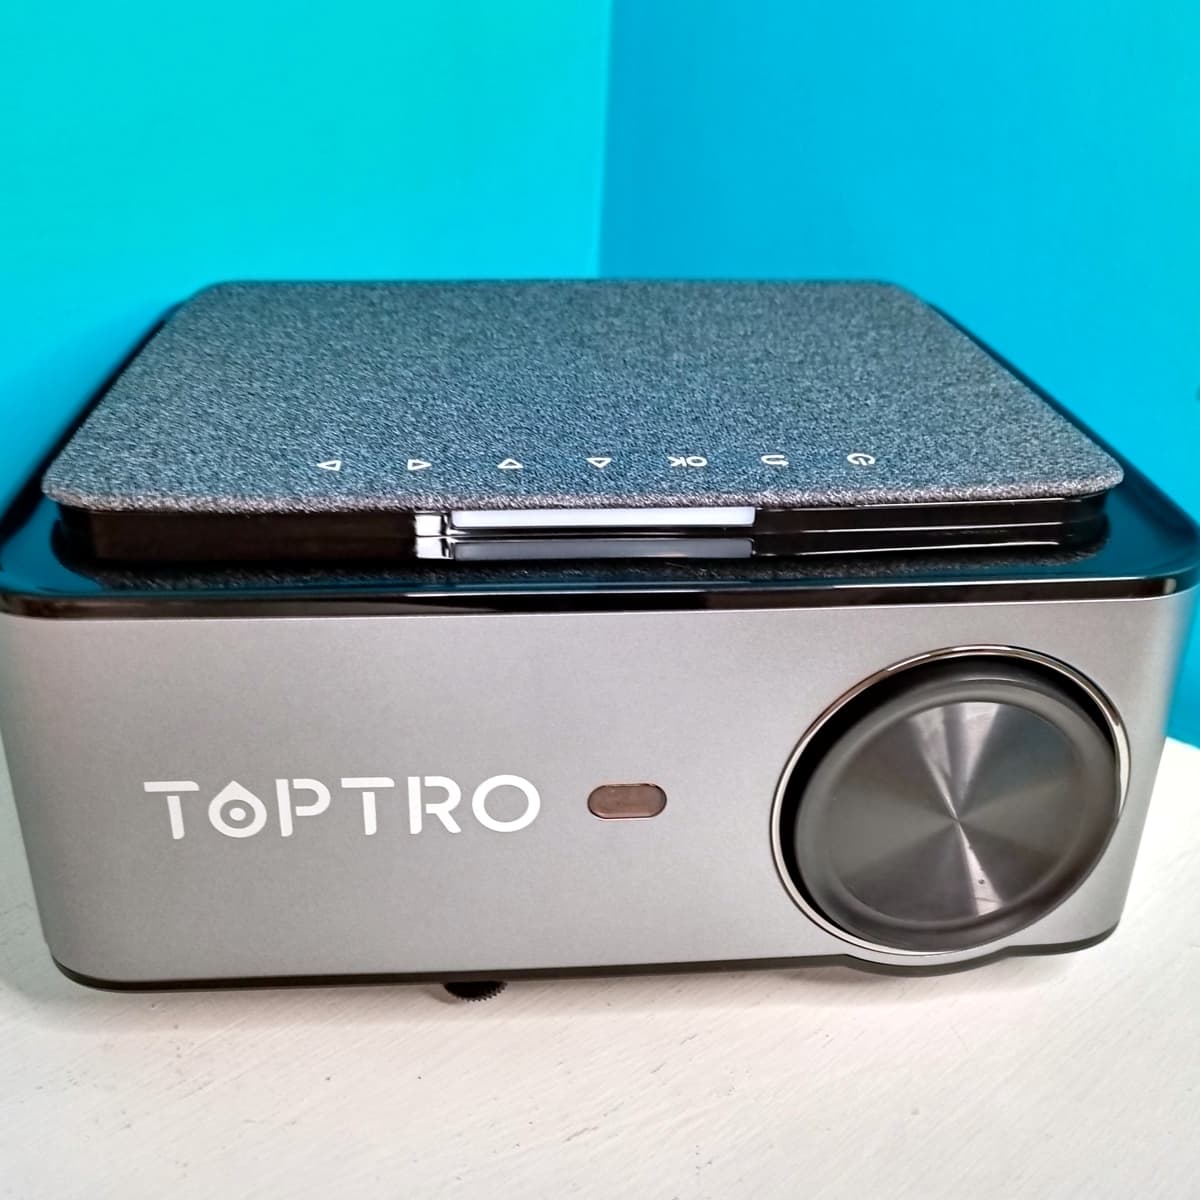 White Toptro X3 Projector Bundle! NEVER USED. Includes HDMI cable & more!